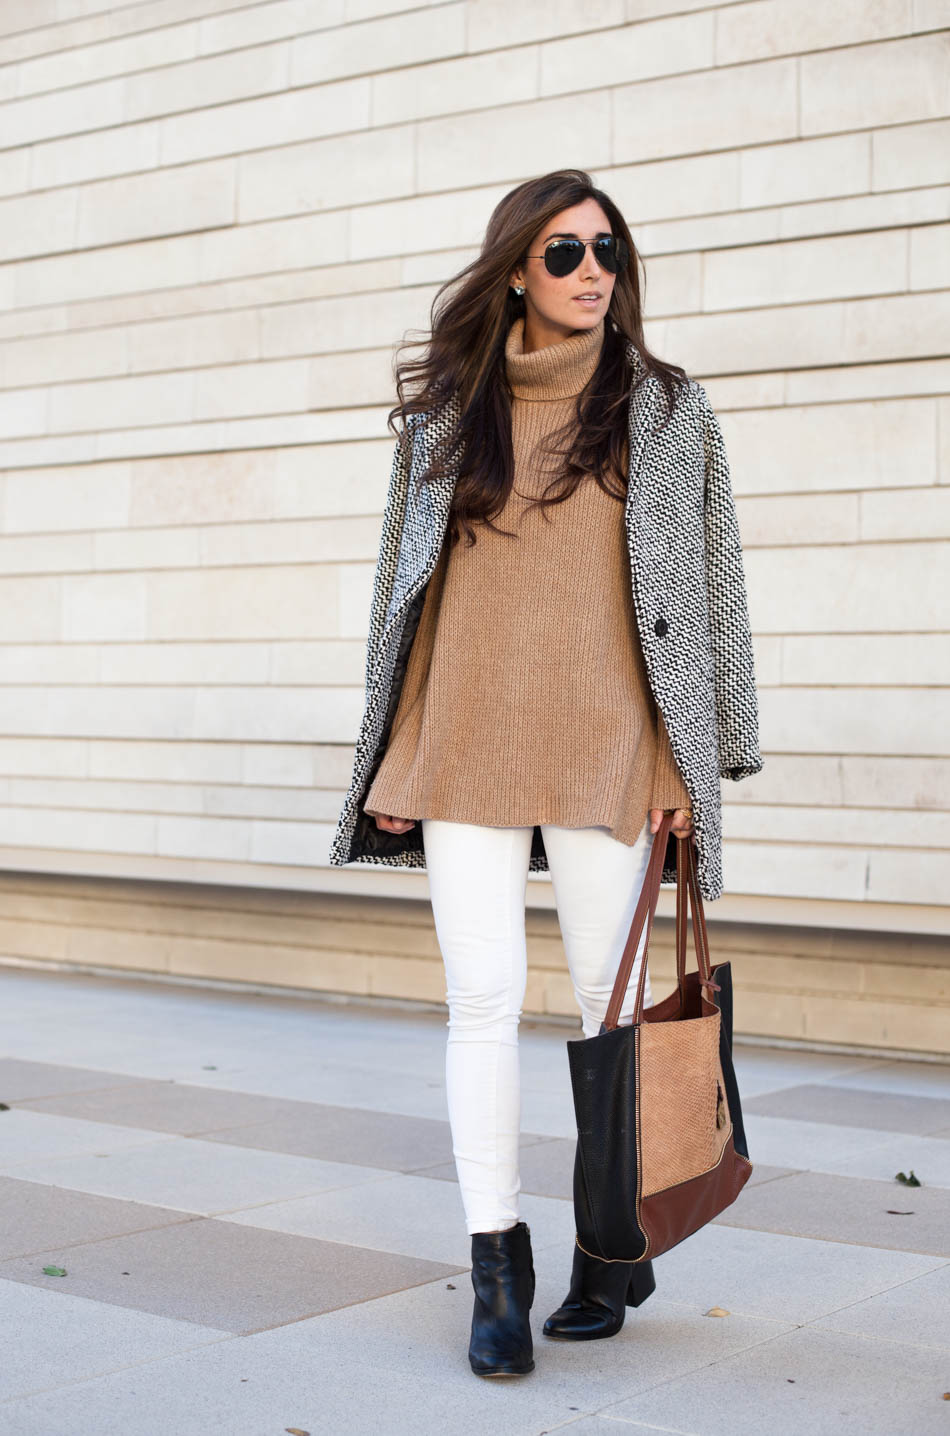 20 outfits to wear on Thanksgiving day